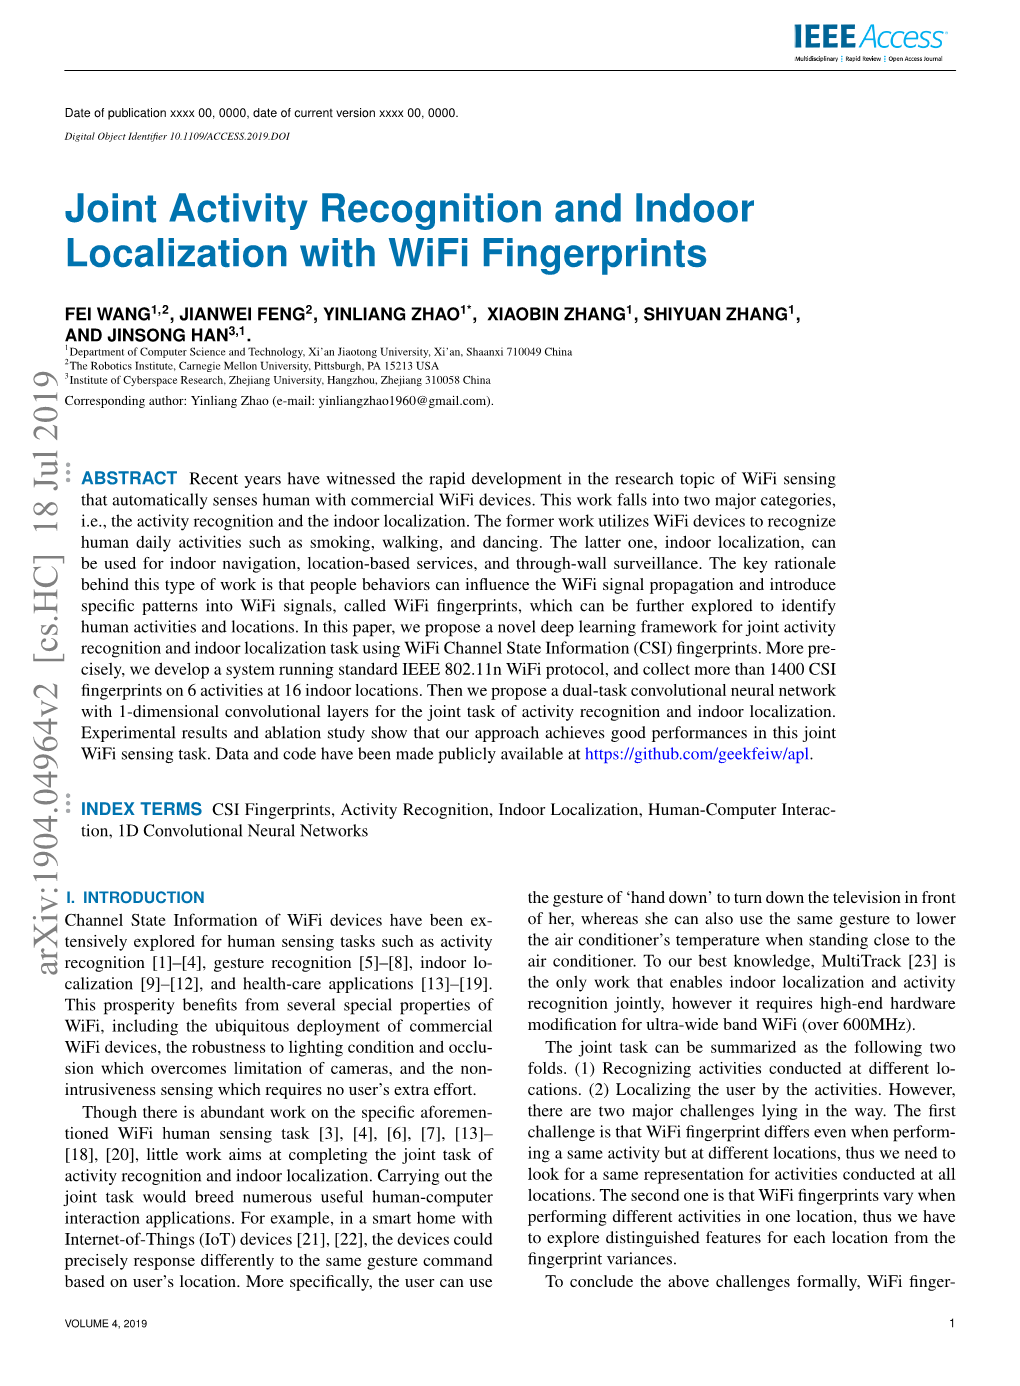 Joint Activity Recognition and Indoor Localization with Wifi Fingerprints